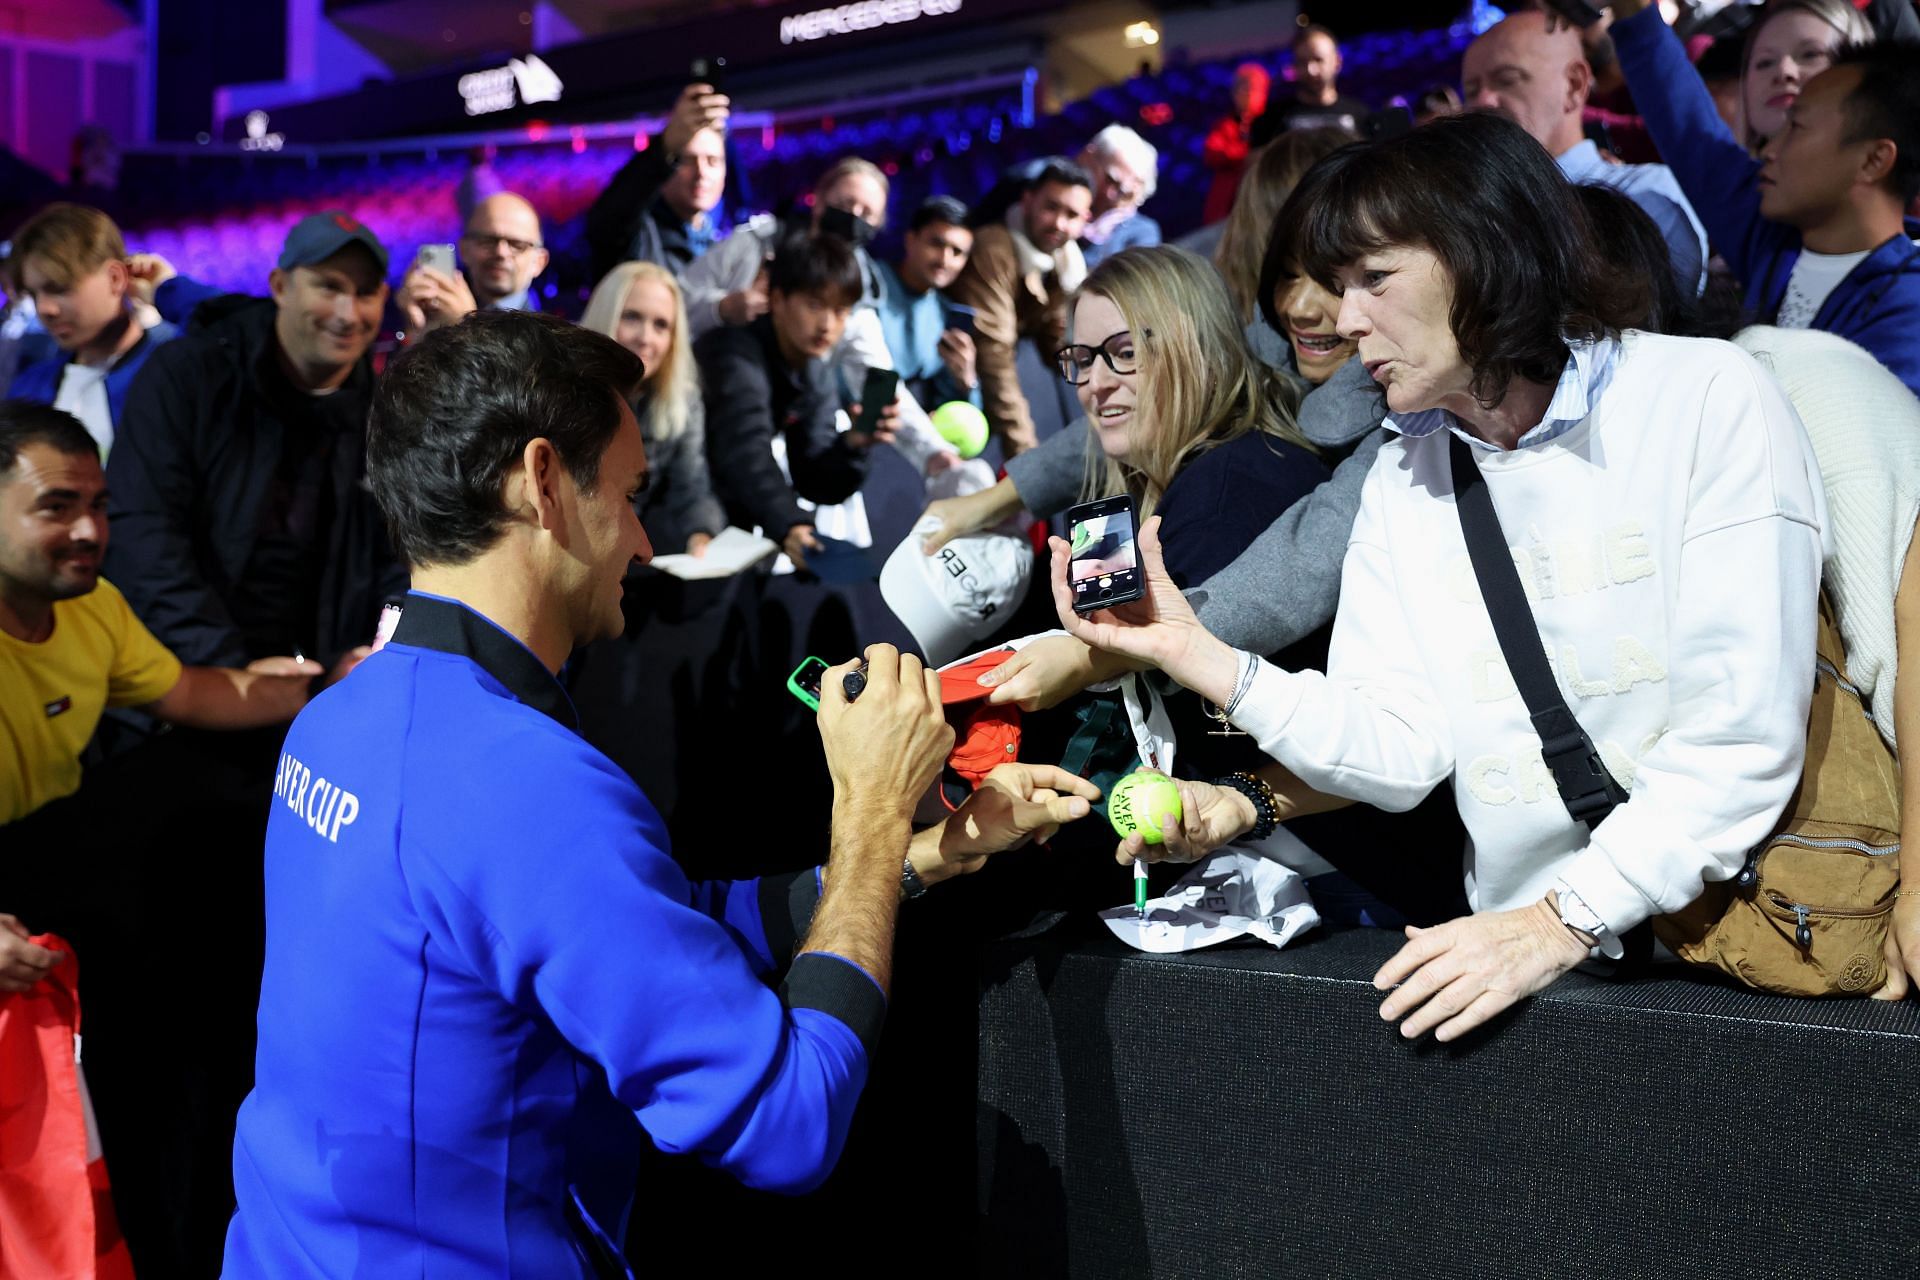 Roger Federer signing autographs during the Laver Cup